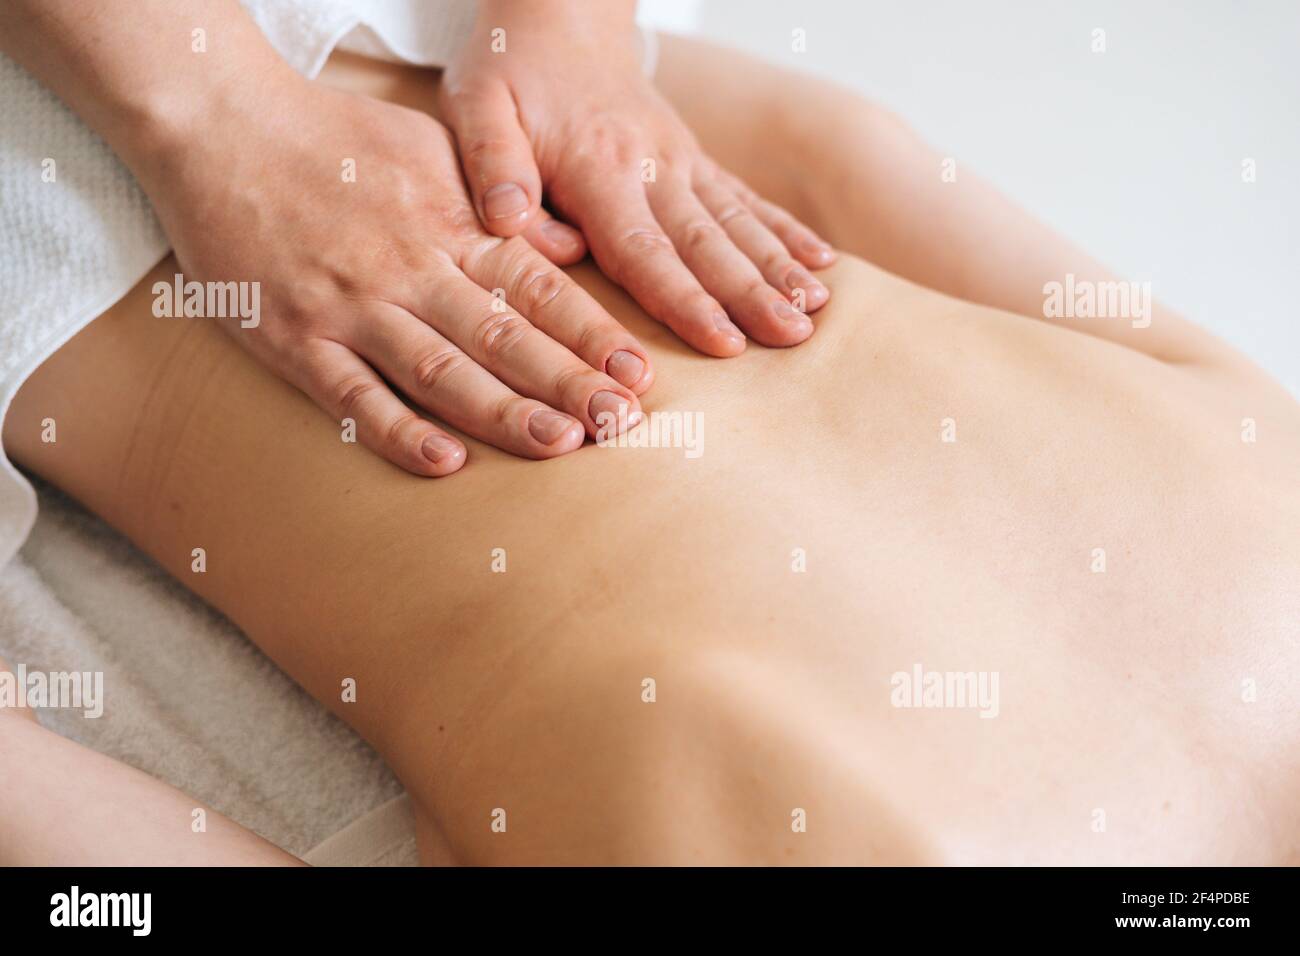 Top view of male masseur massaging back of young unrecognizable woman lying on massage table. Stock Photo